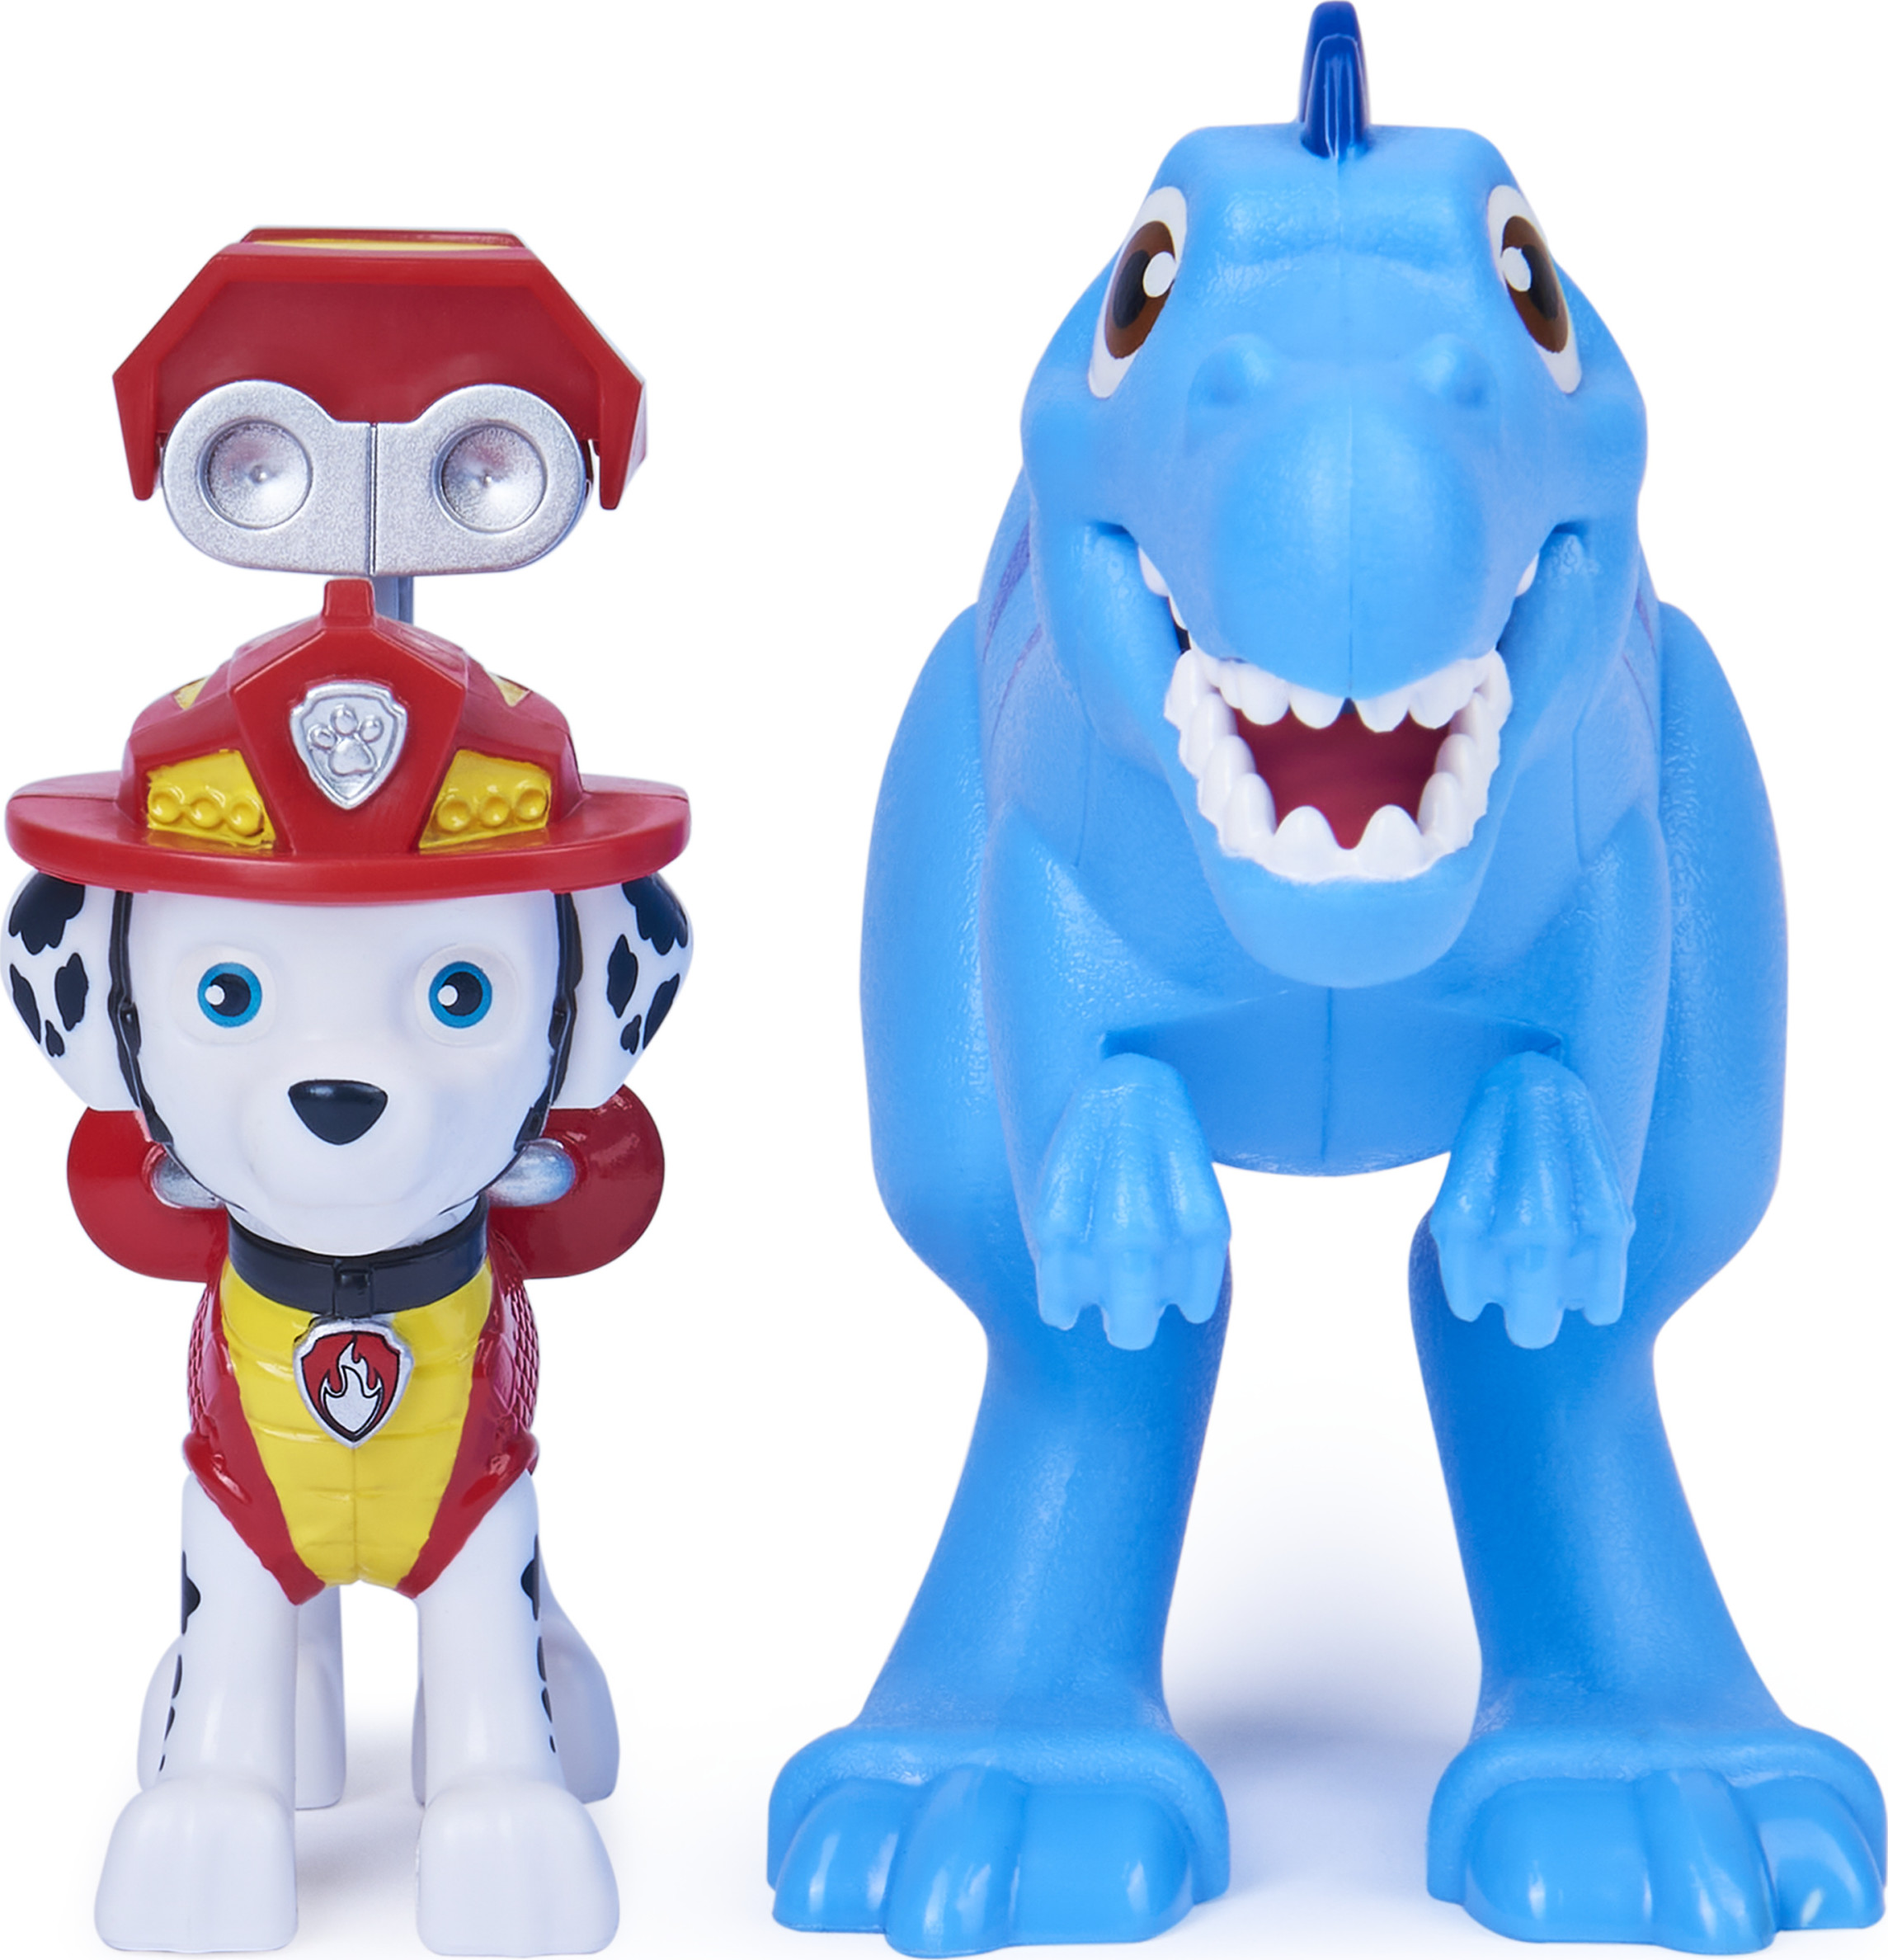 PAW Patrol, Dino Rescue Marshall and Dinosaur Action Figure Set, for Kids Aged 3 and up - image 3 of 5